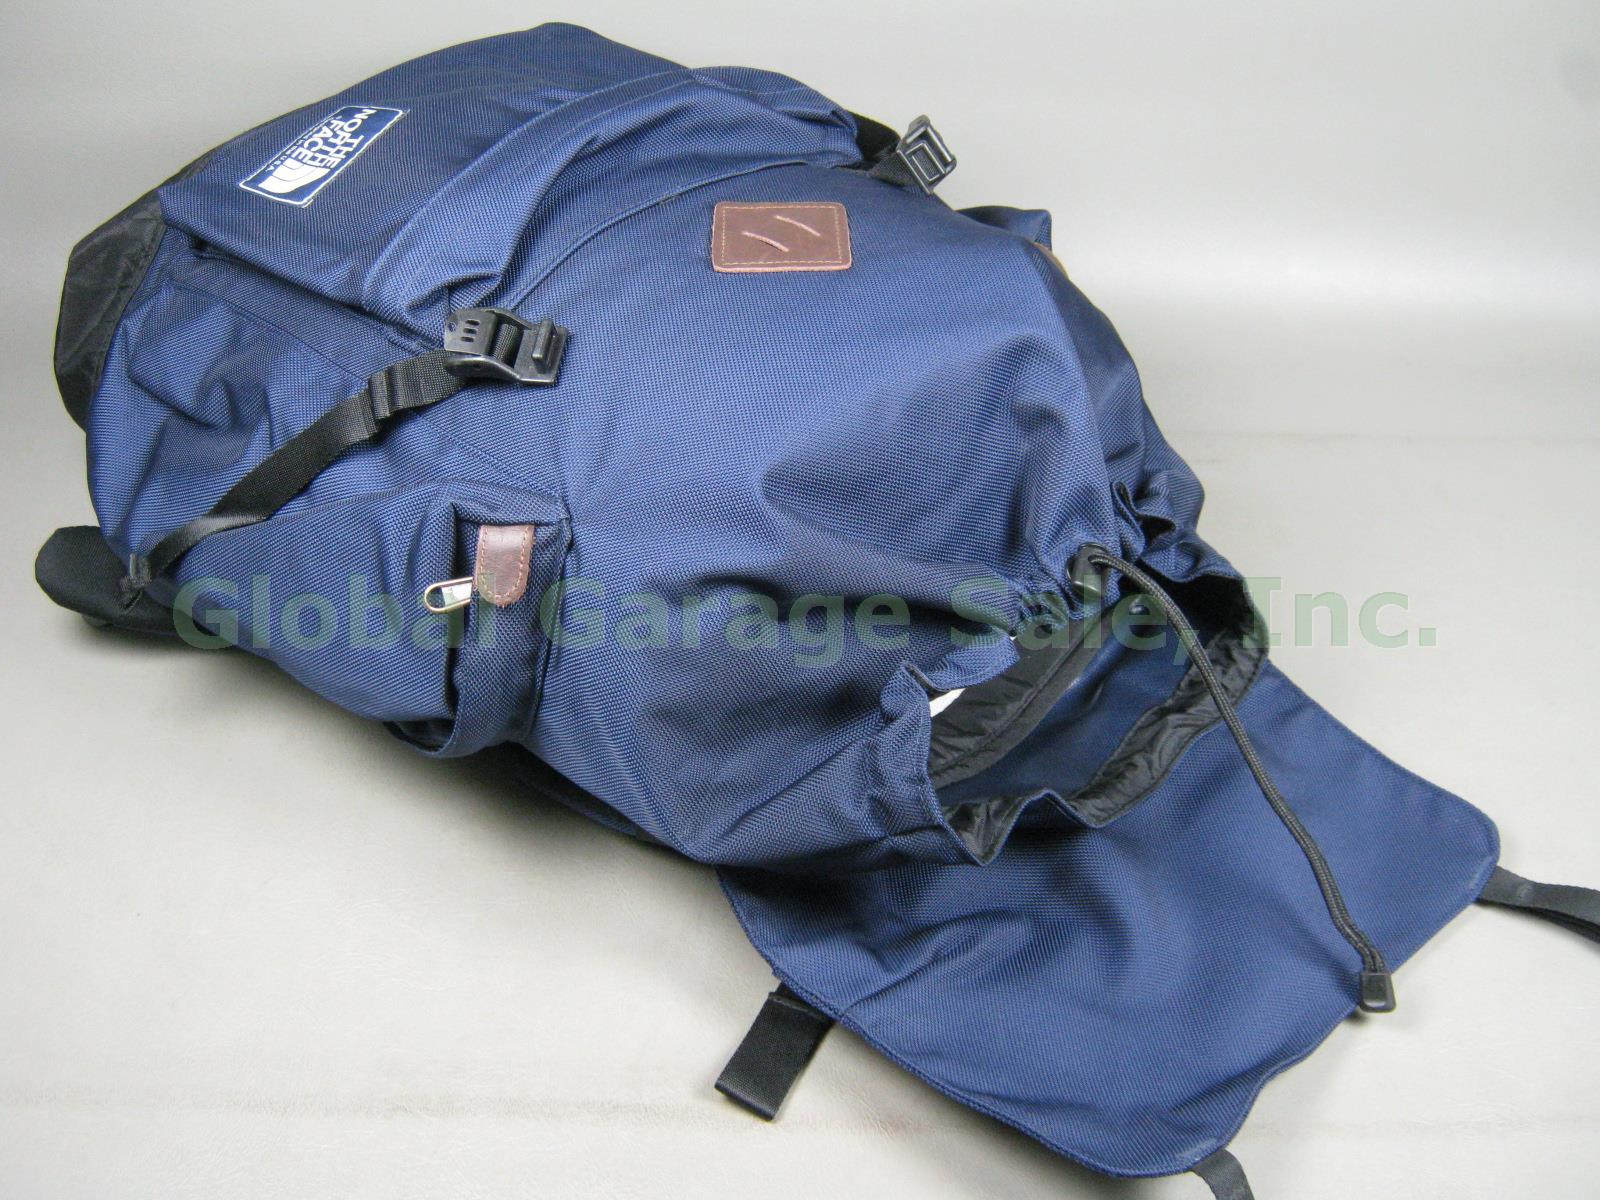 NEW NWOT The North Face Ruck Sack Backpack Daypack Nylon Leather Blue No reserve 6